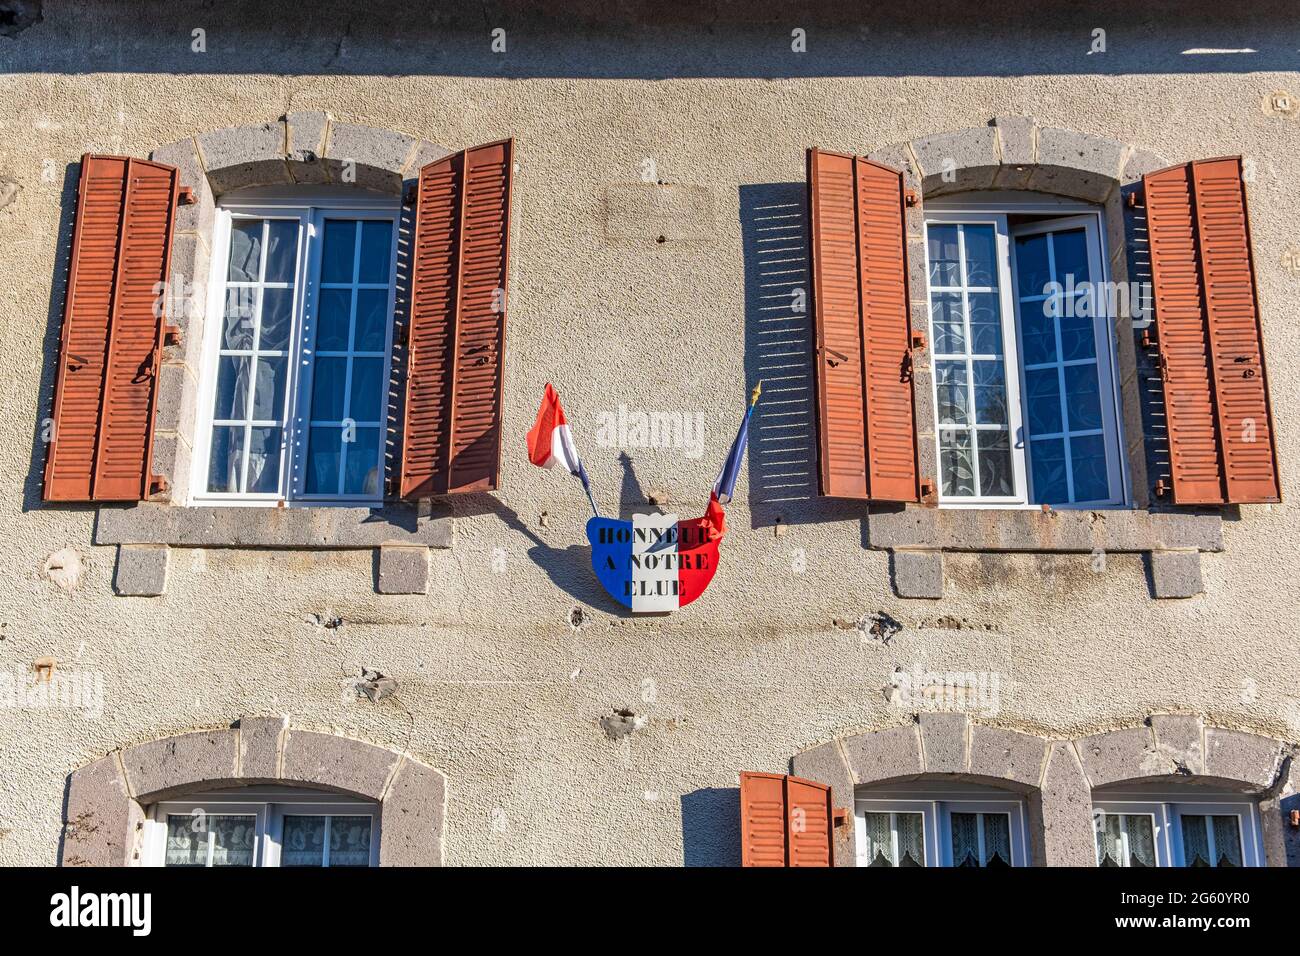 France, Cantal, Montboudif, birthplace of President Georges Pompidou, traditional ornament on the facade of the house of an elected official, regional natural park volcanoes of Auvergne (Parc naturel régional des Volcans d'Auvergne) Stock Photo